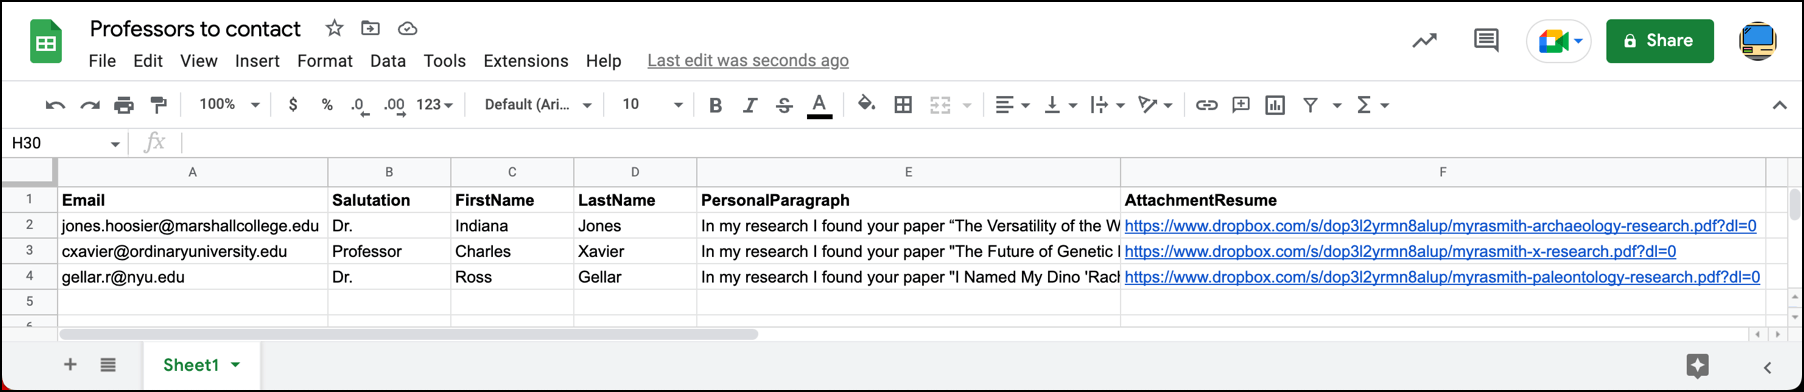 A Google Sheet for cold emails to professors